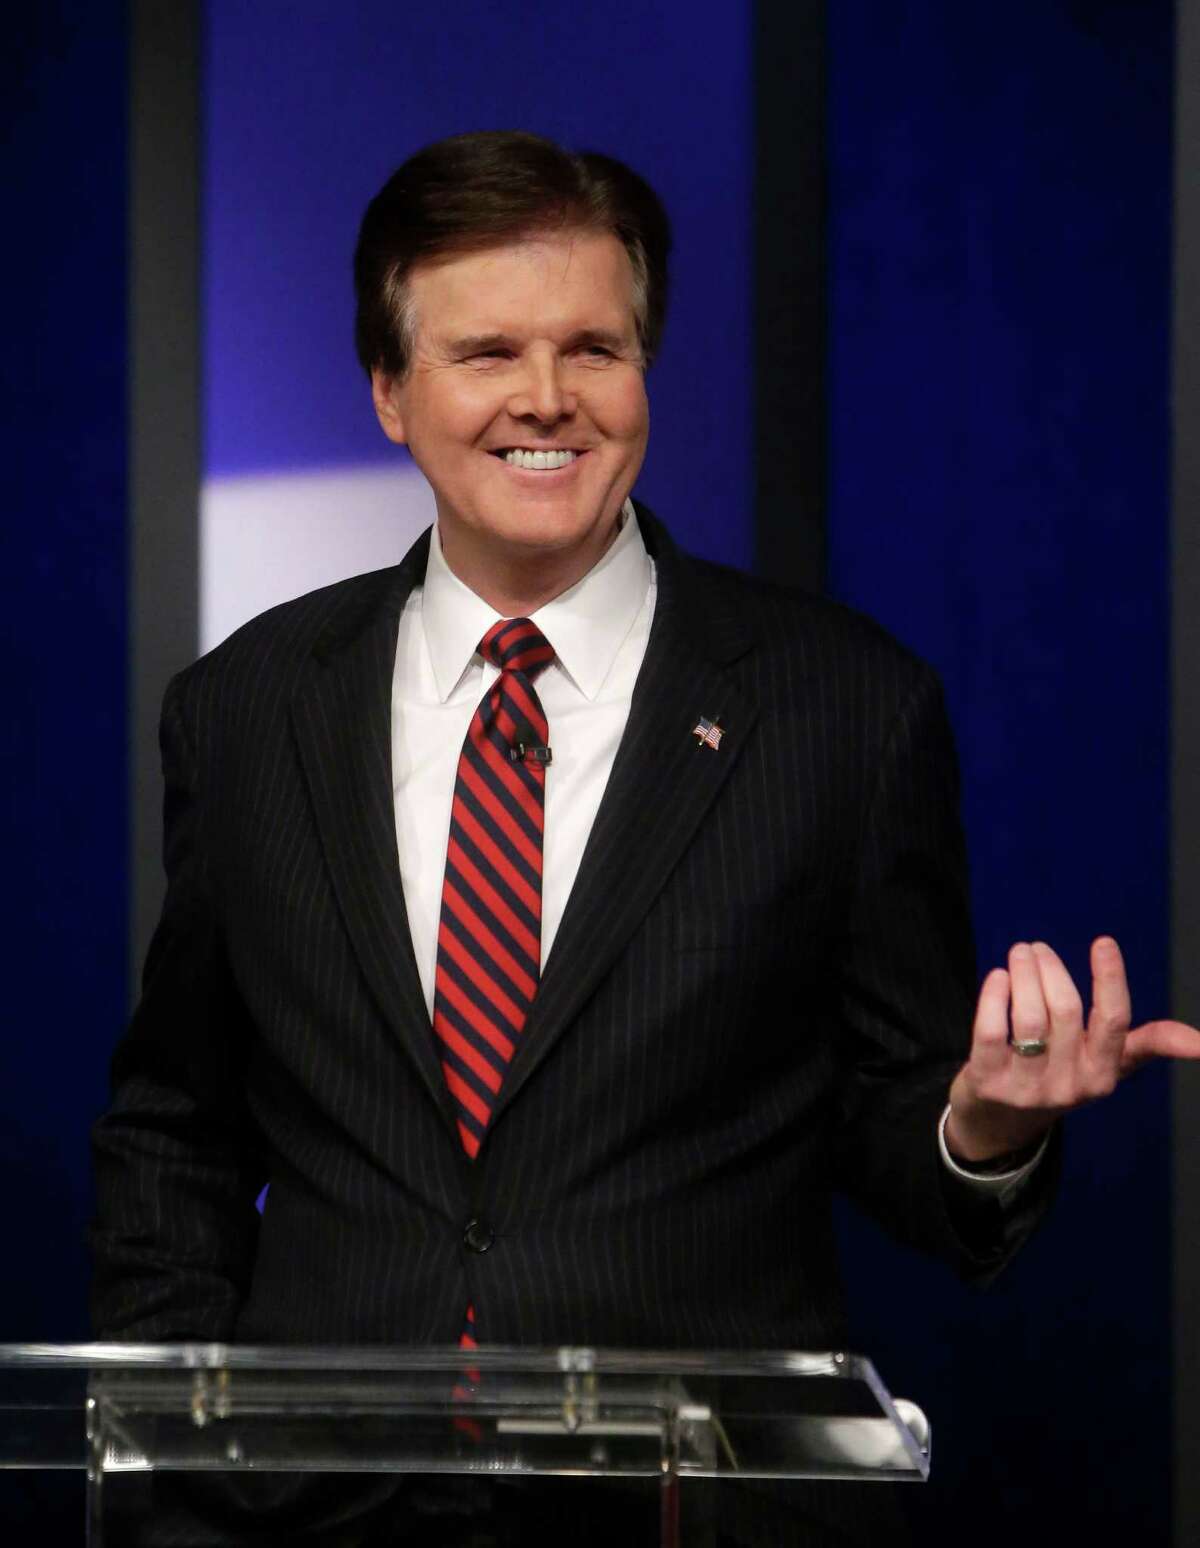 Republican Texas lieutenant governor candidate Sen. Dan Patrick speaks during a debate at KERA studios in Dallas, Monday, Jan. 27, 2014. The four Republican candidates are vying to be Texas lieutenant governor, a post considered to be the most powerful in the state. (AP Photo/LM Otero,Pool)